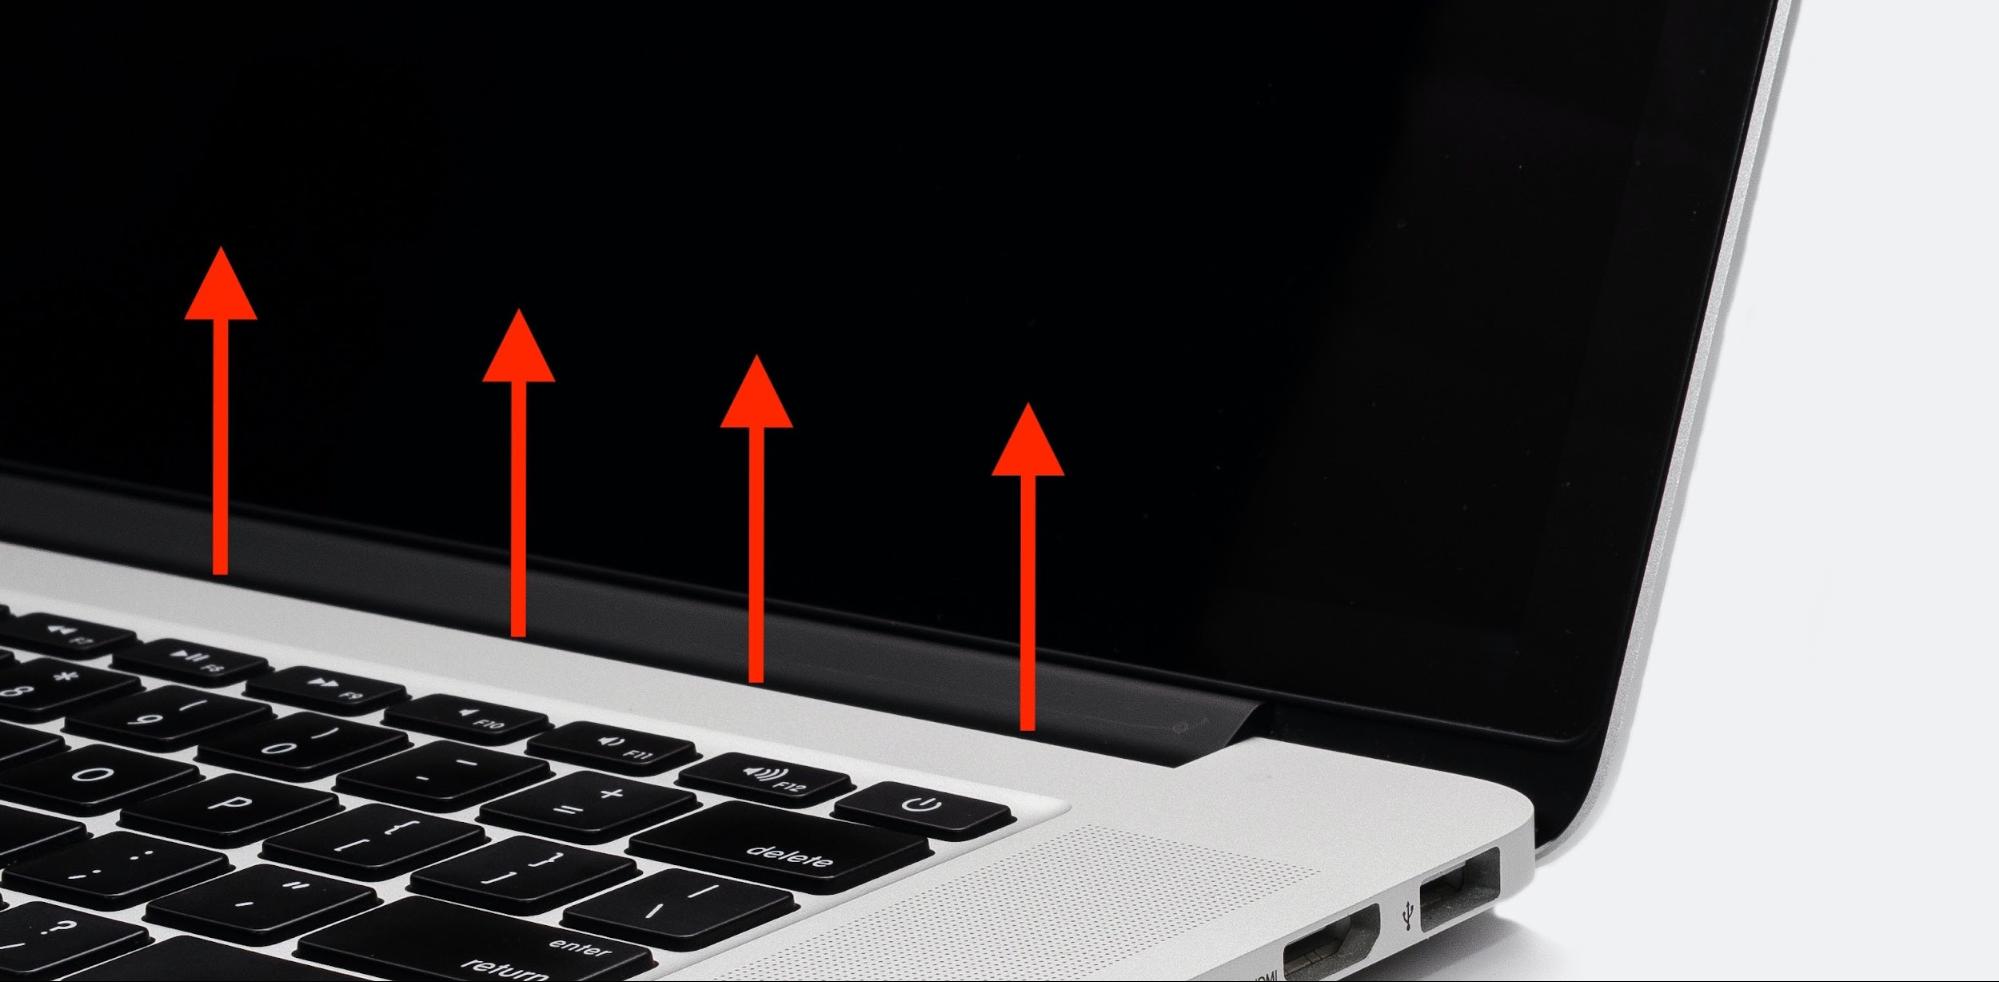 The vents on your Mac are vital. Make sure you don't block them while you're using it, because that will lead to rapid overheating.